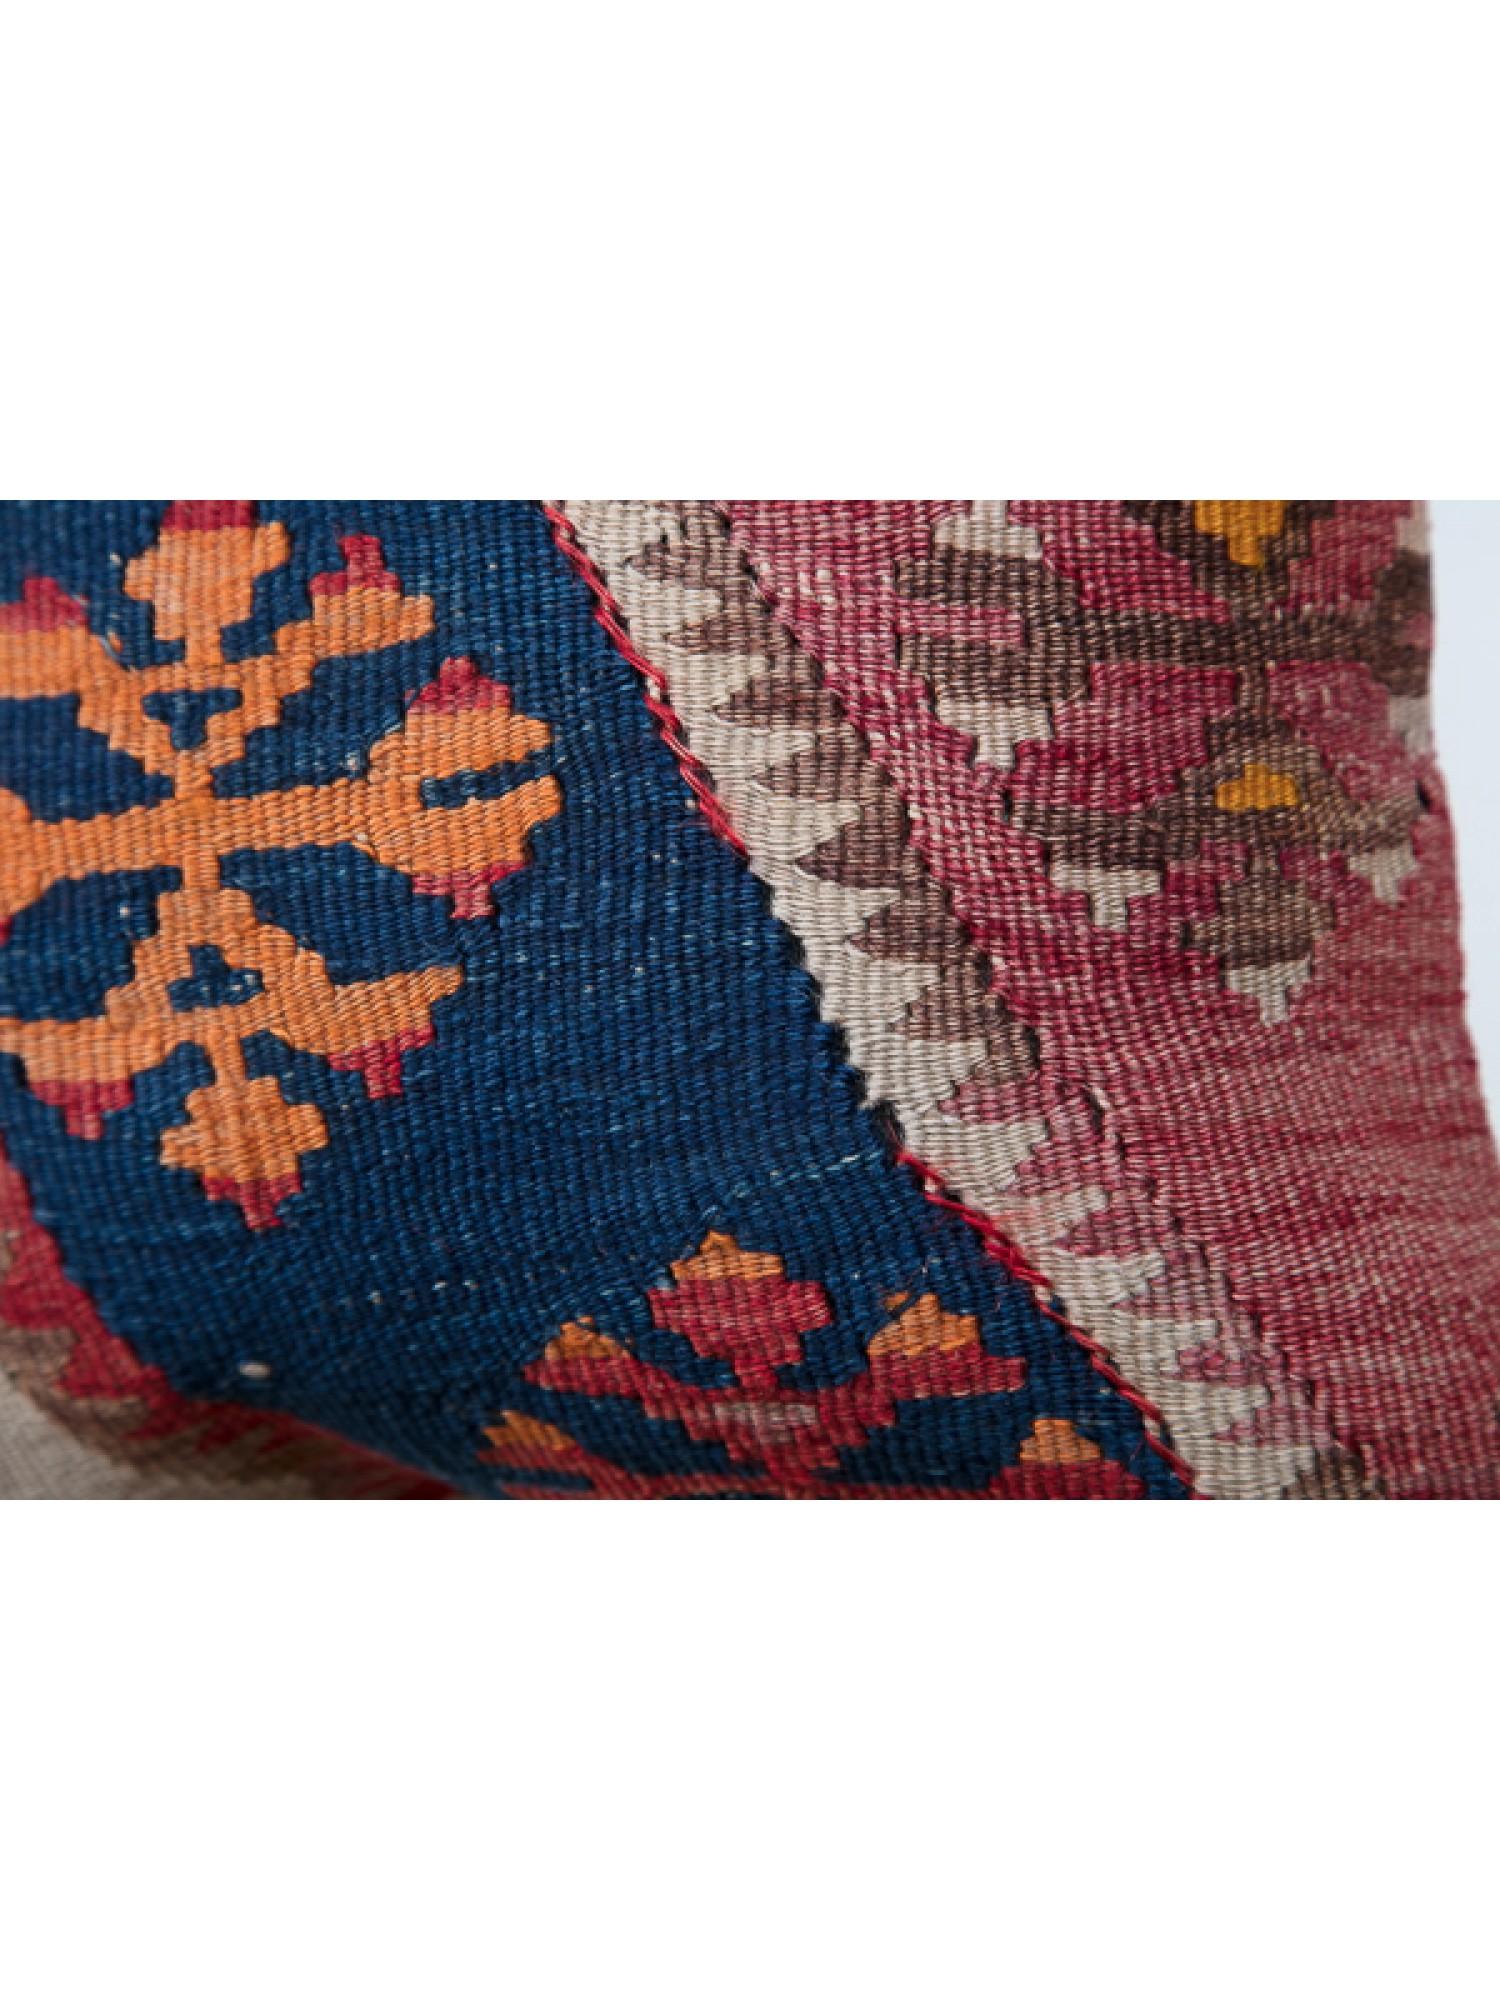 Contemporary Antique & Old Kilim Cushion Cover, Anatolian Yastik Turkish Modern Pillow KC3506 For Sale